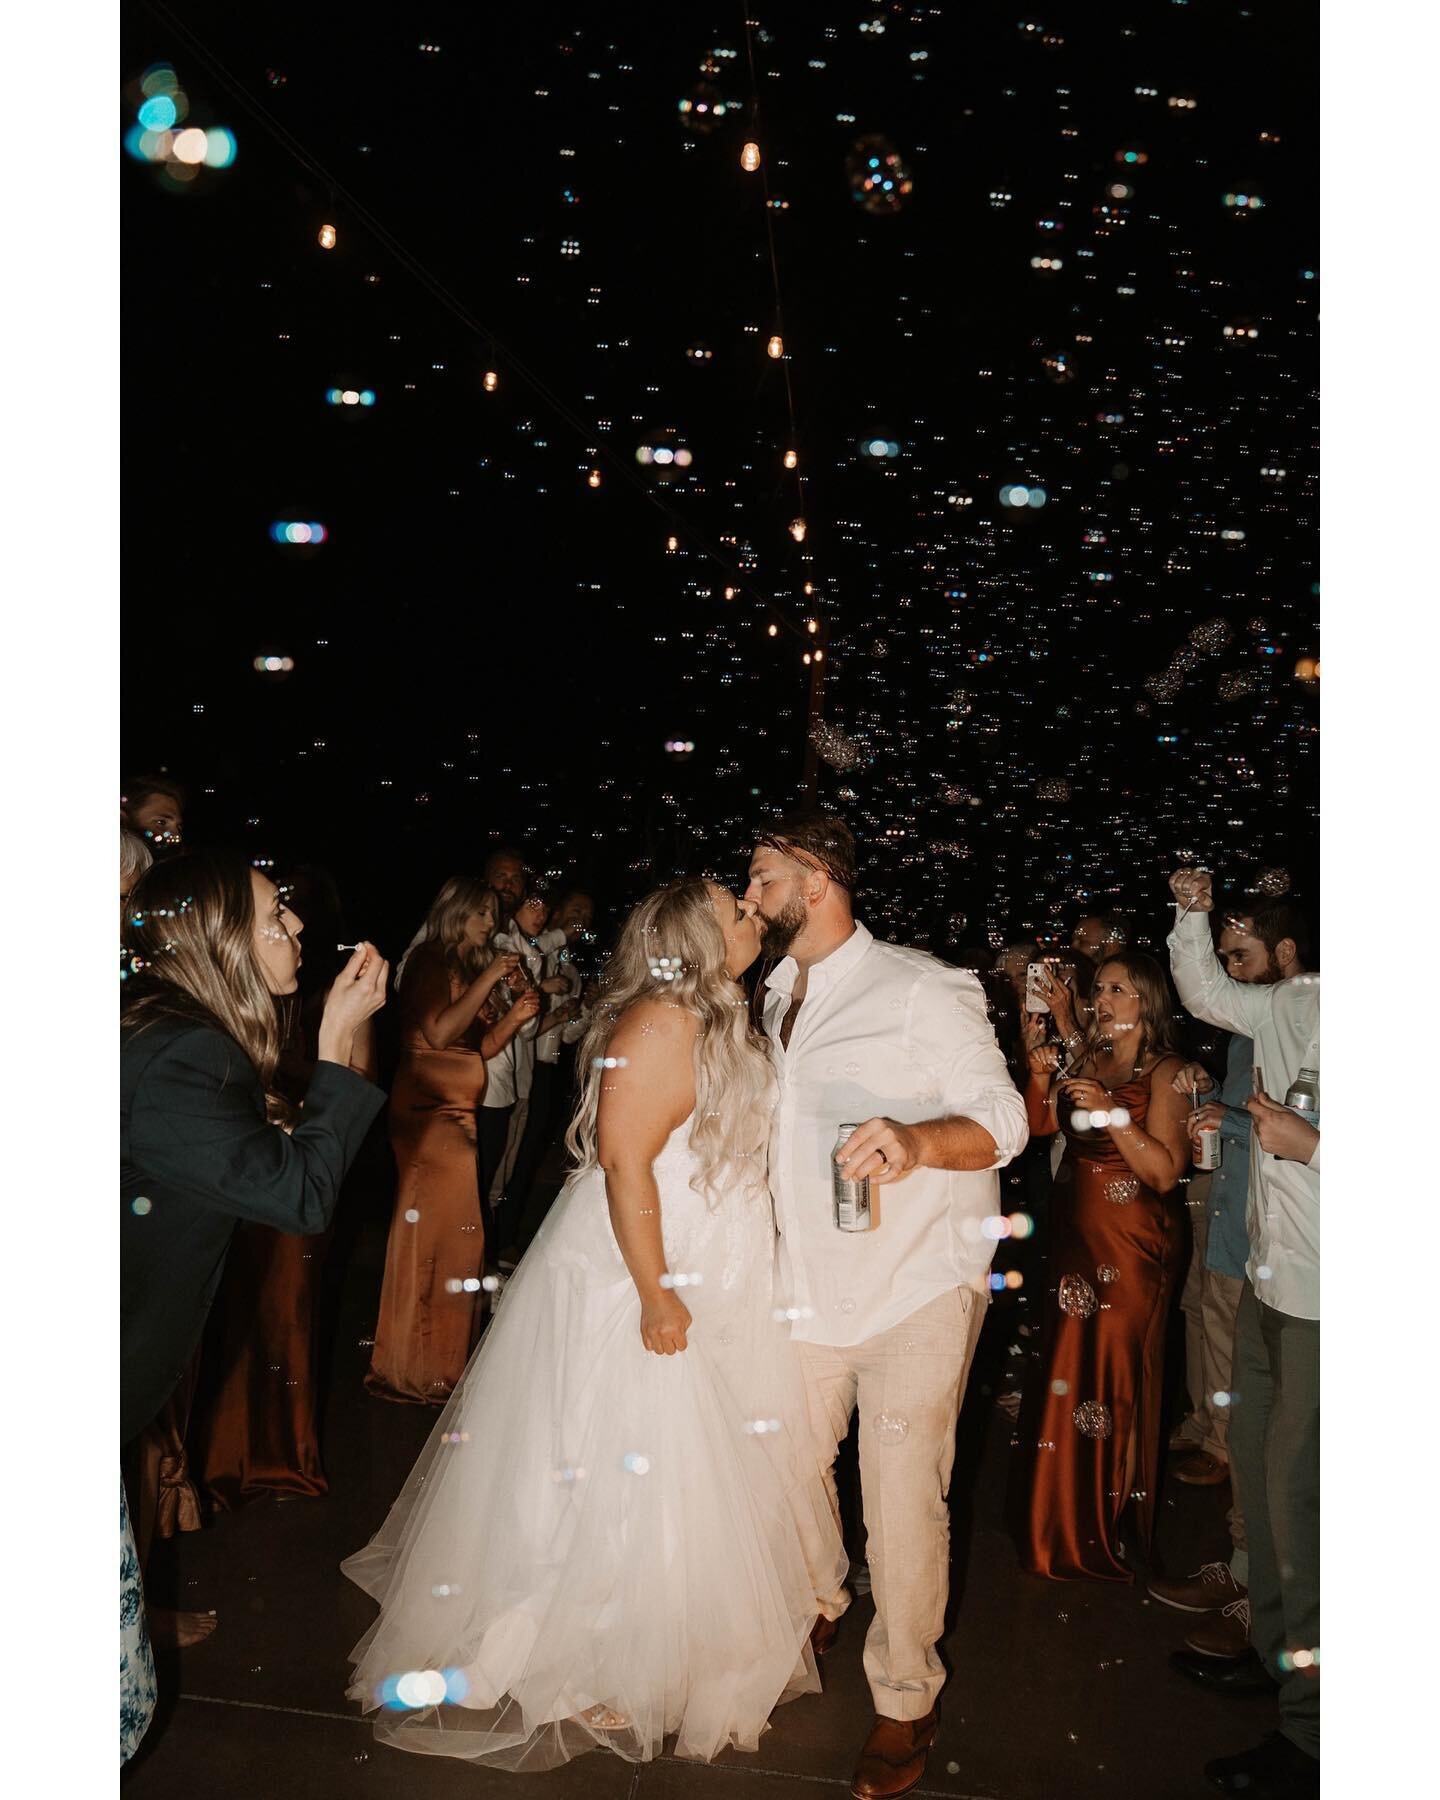 Let's talk about how awesome bubble exits at weddings. Seriously, they're so fun and here's why they're my new favorite exit!
⠀⠀⠀⠀⠀⠀⠀⠀⠀
-Blissful Beginnings: Bubbles symbolize new beginnings and pure happiness.
-Playful and Easy: No messy rice or pot